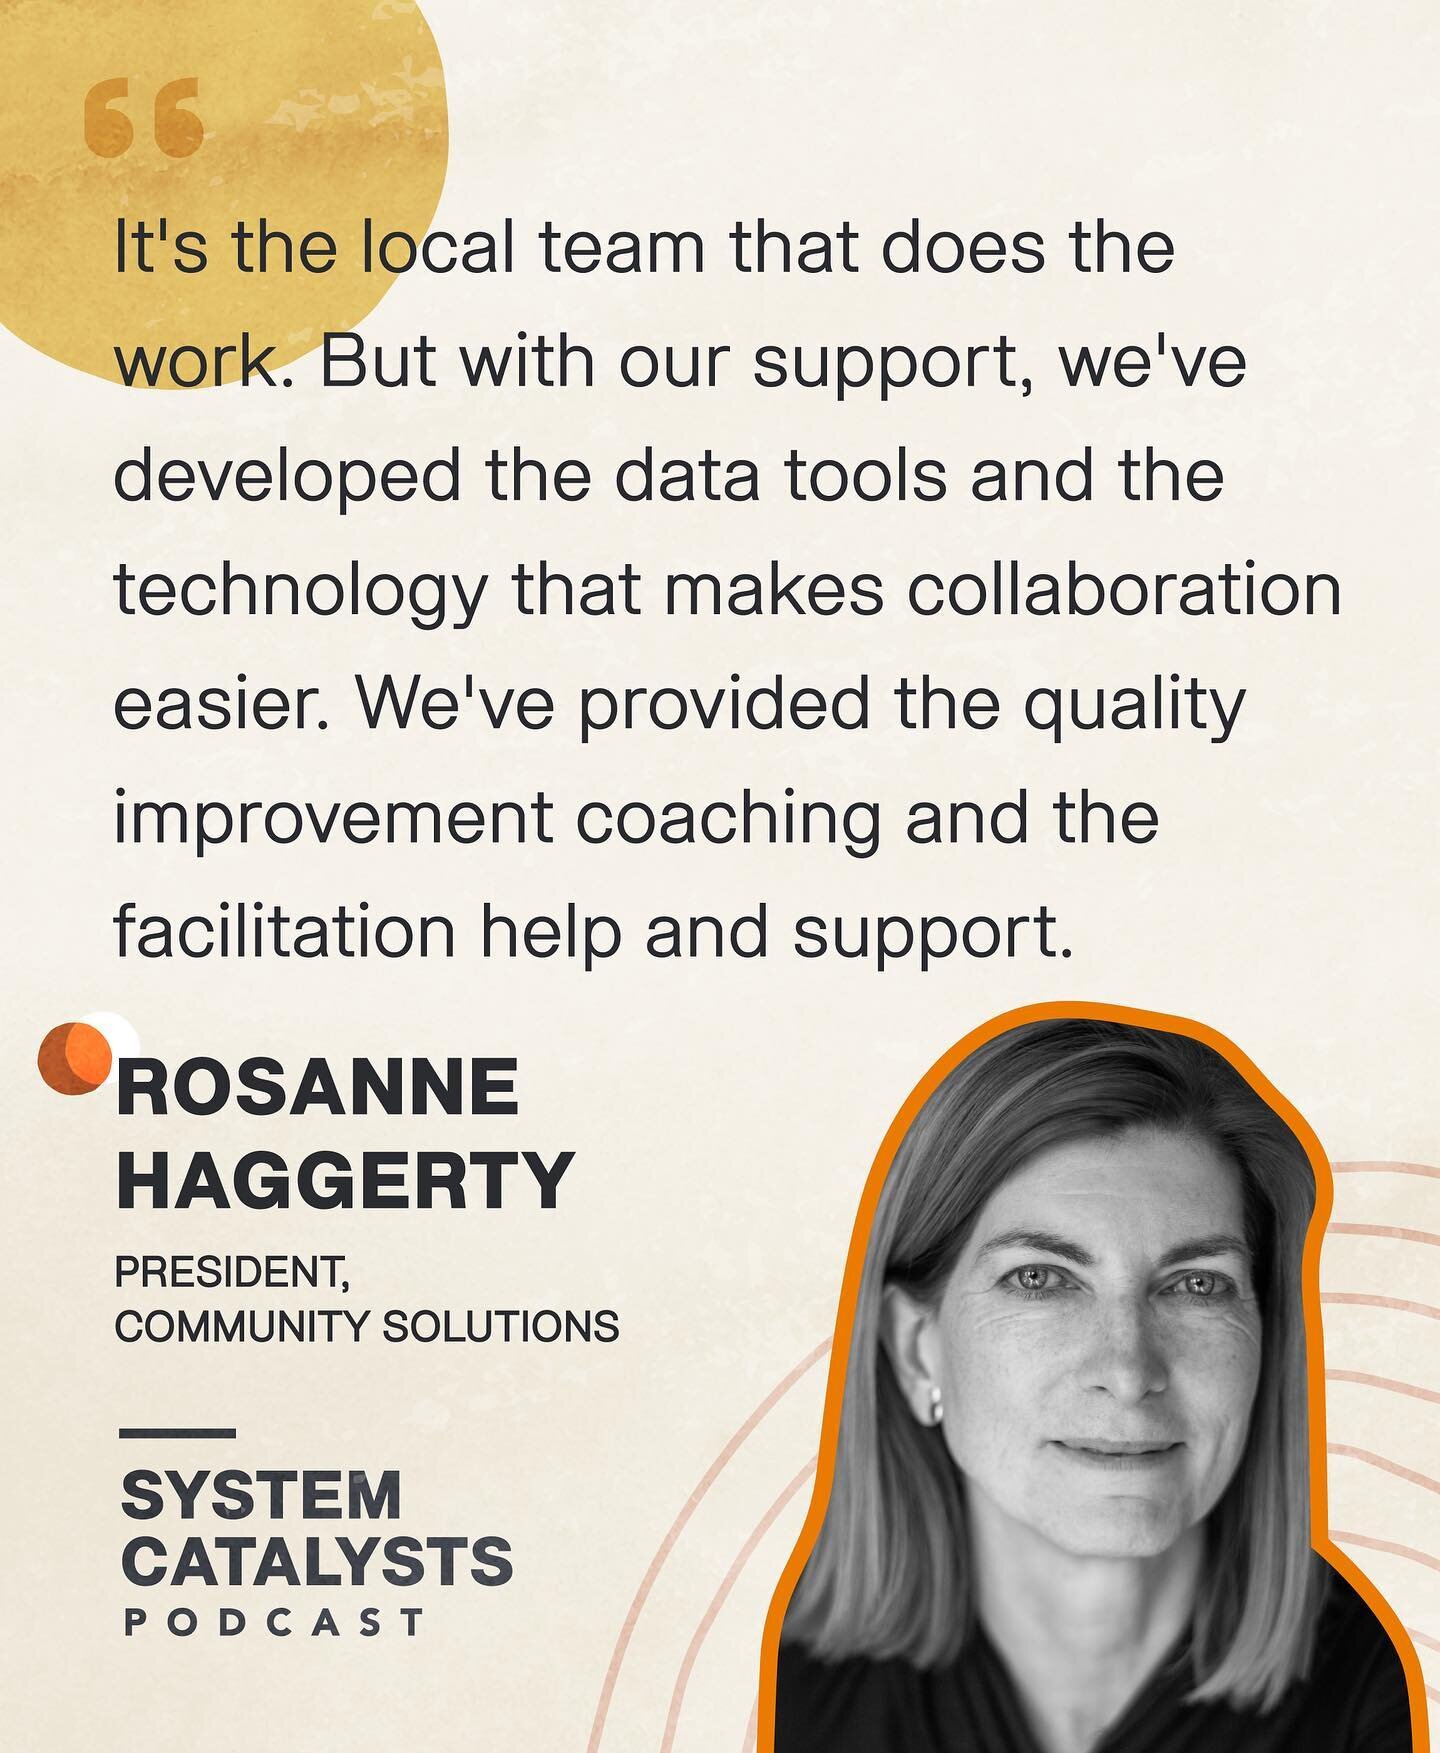 We welcomed Rosanne Haggerty, President of @cmtysolutions, and Dan Heath, Author of Upstream, on episode 6 and heard why a data-driven, collaborative approach is a powerful method to solve system problems.

Listen to how data sharing can help nonprof